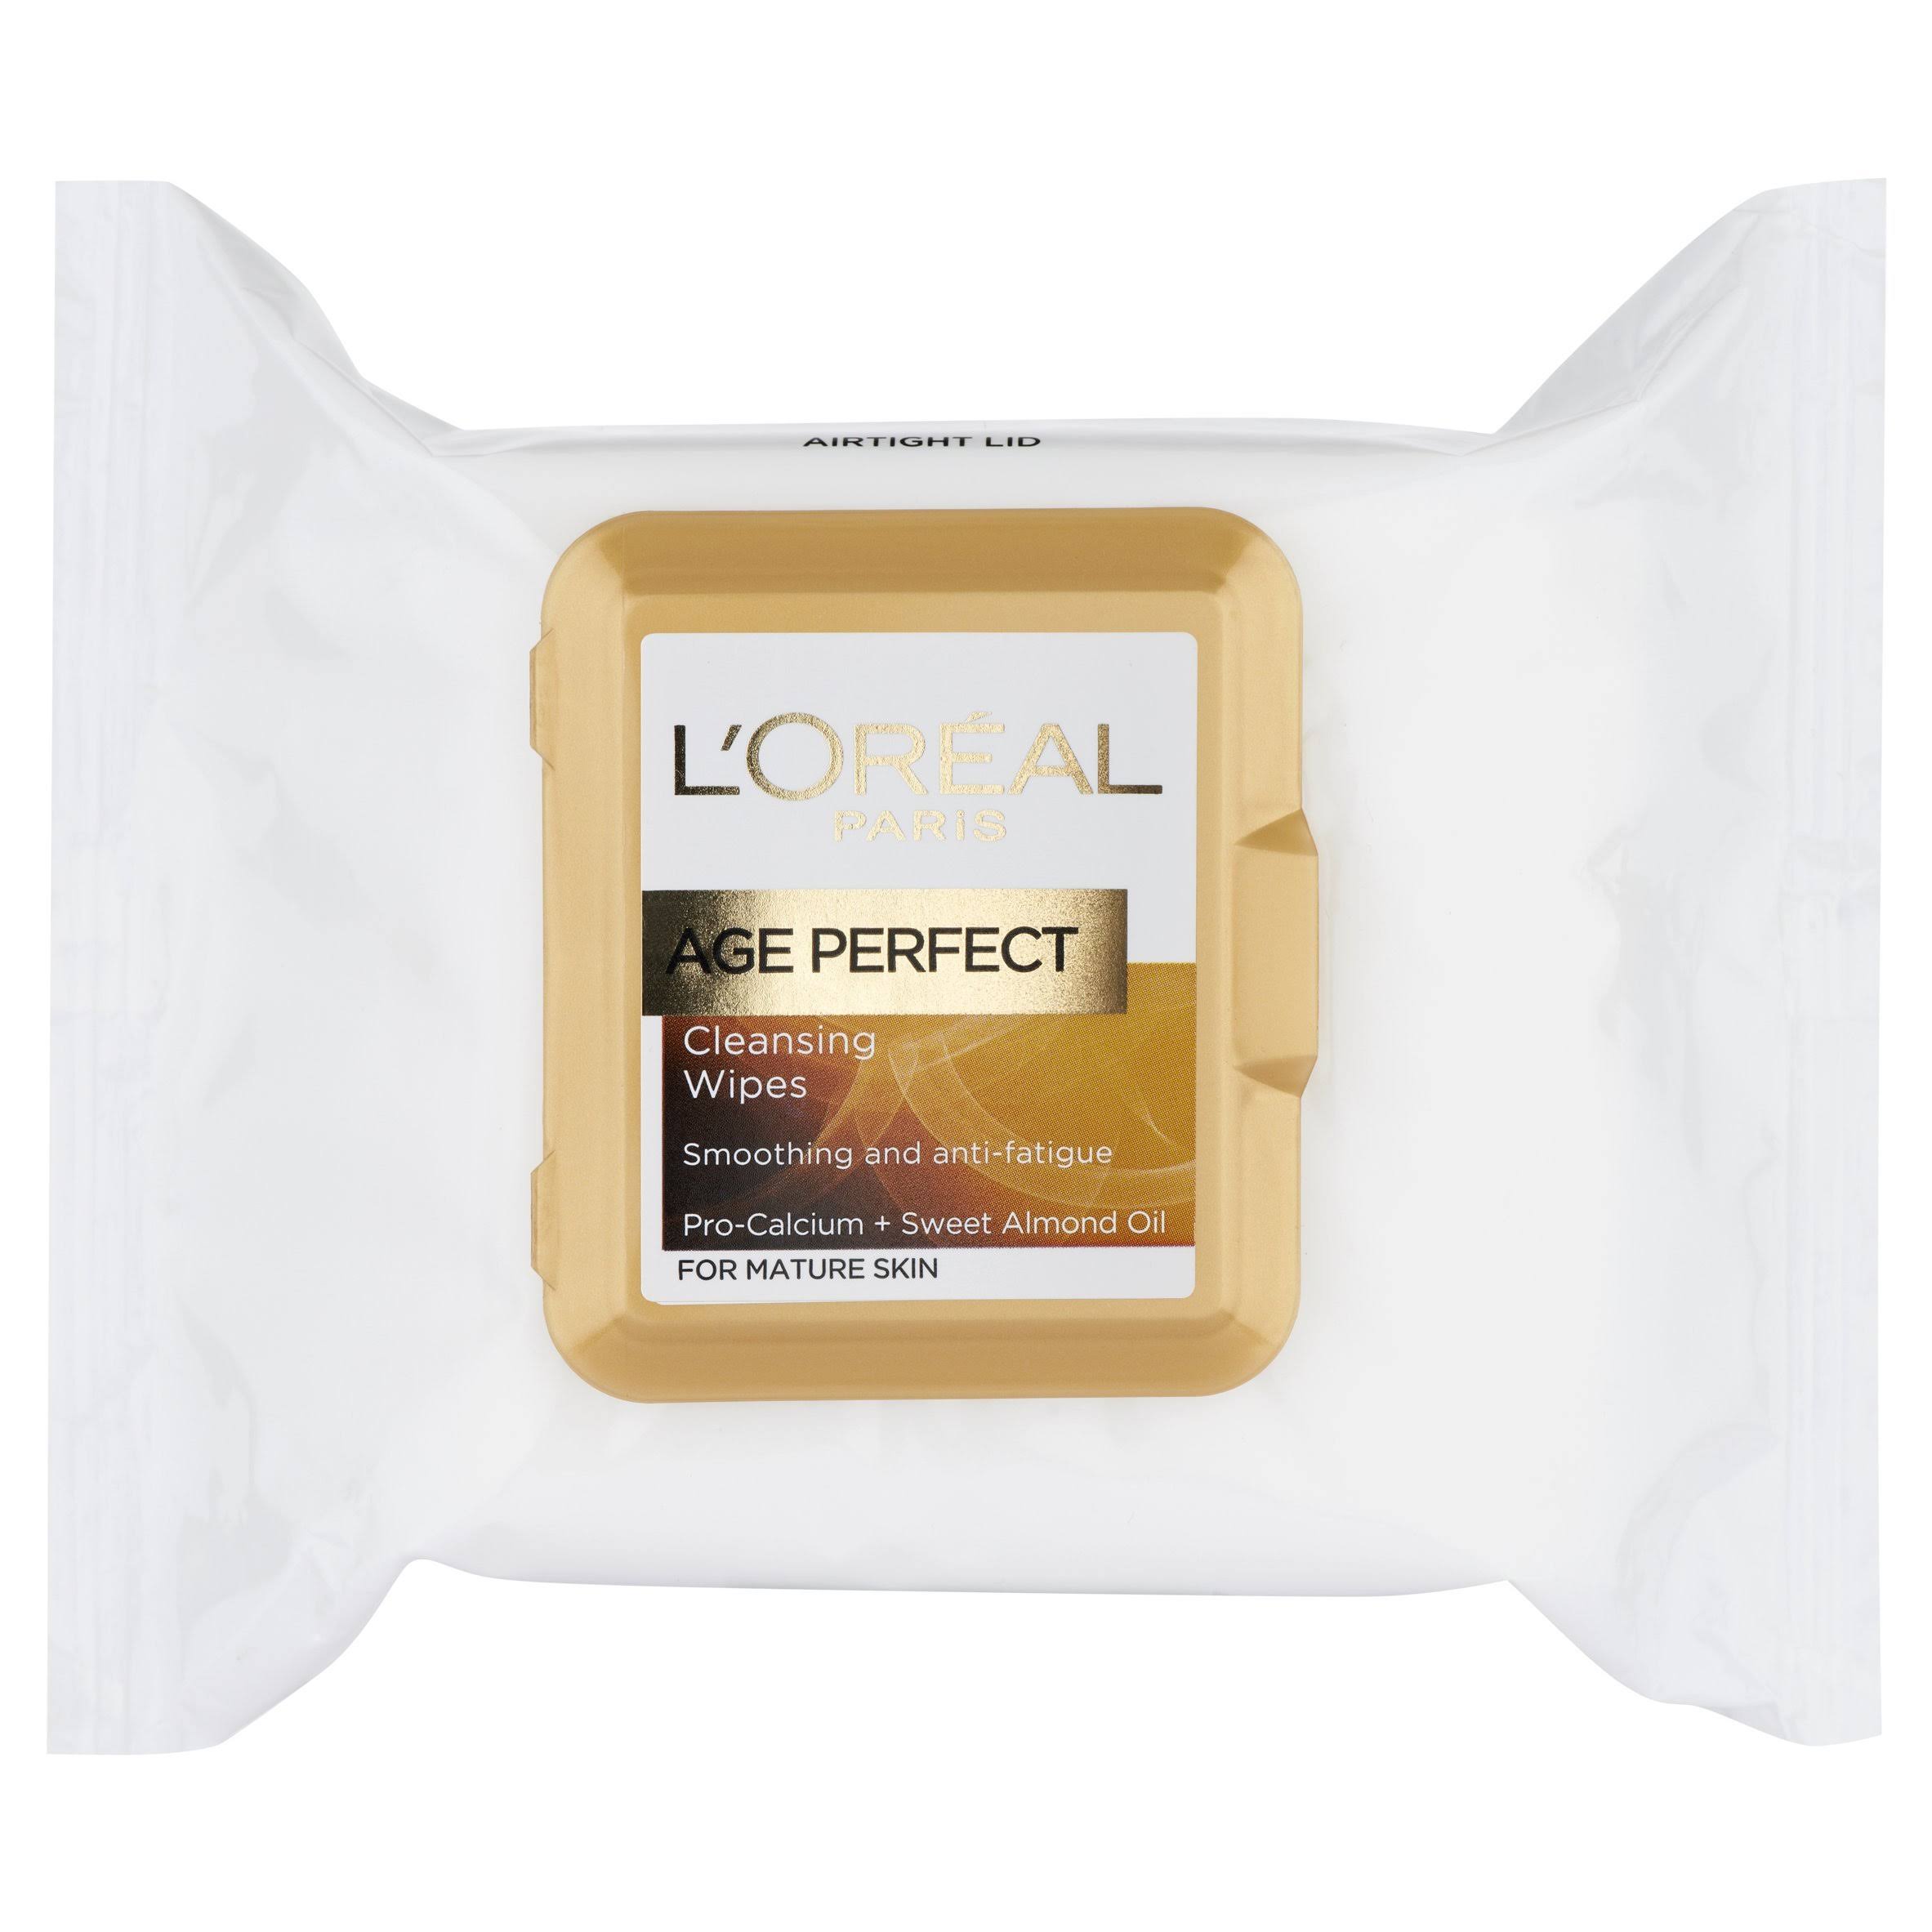 Loreal Paris Age Perfect Cleansing Wipes - 25ct